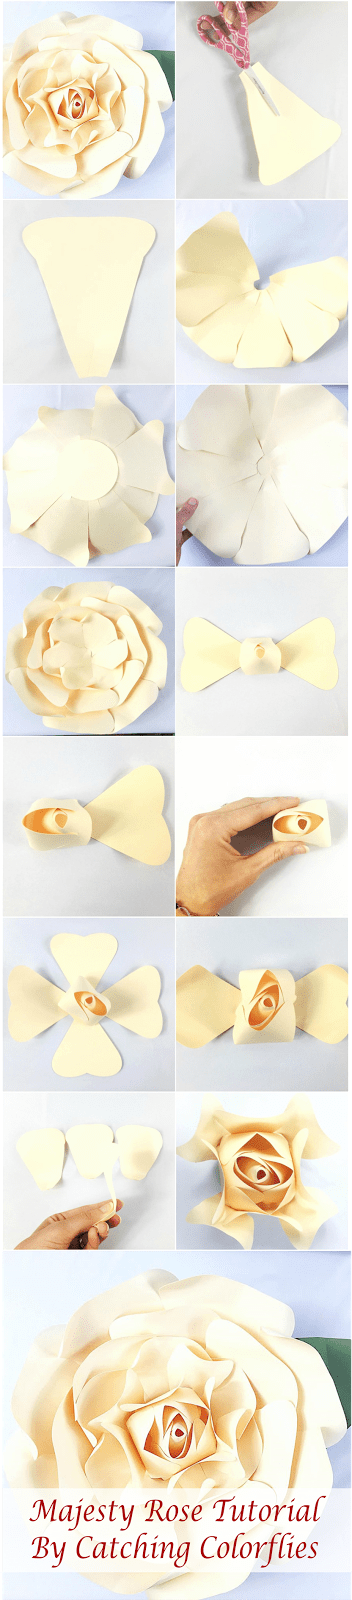 How to Make a Giant Paper Rose. East paper flower tutorial. http://catchingcolorflies.com/